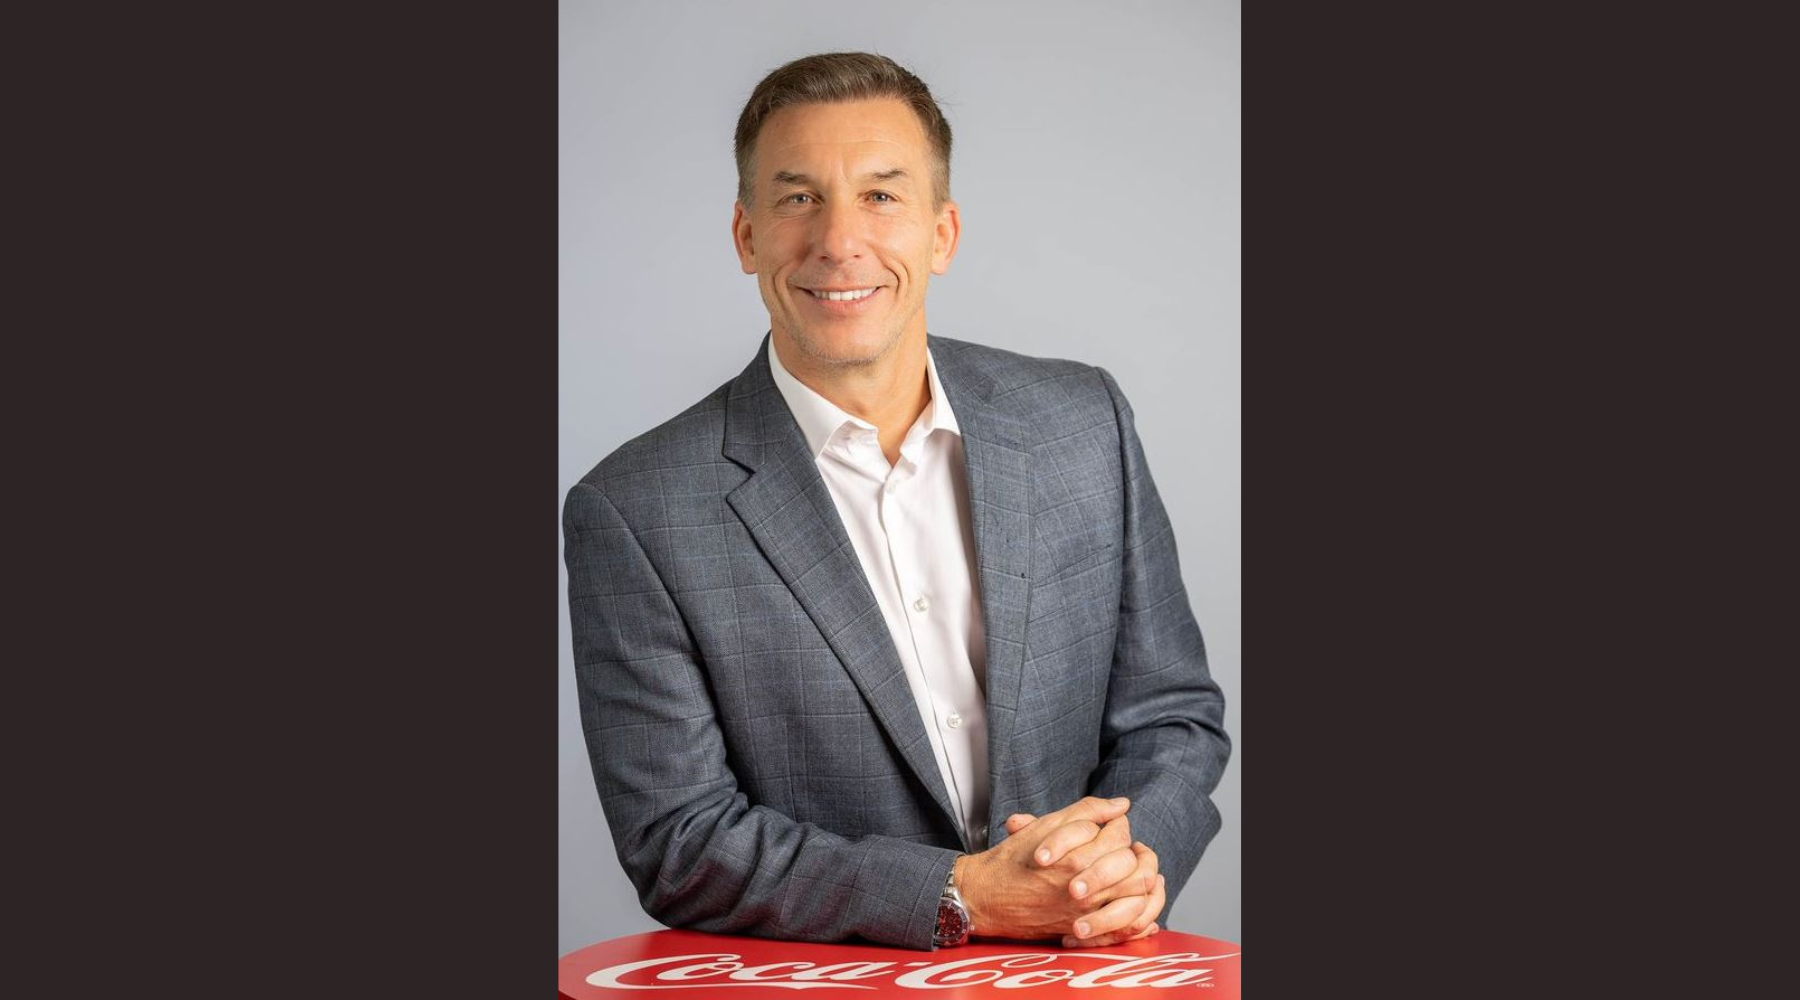 Andrew Buckingham to Lead Coca-Cola’s Middle East Operations